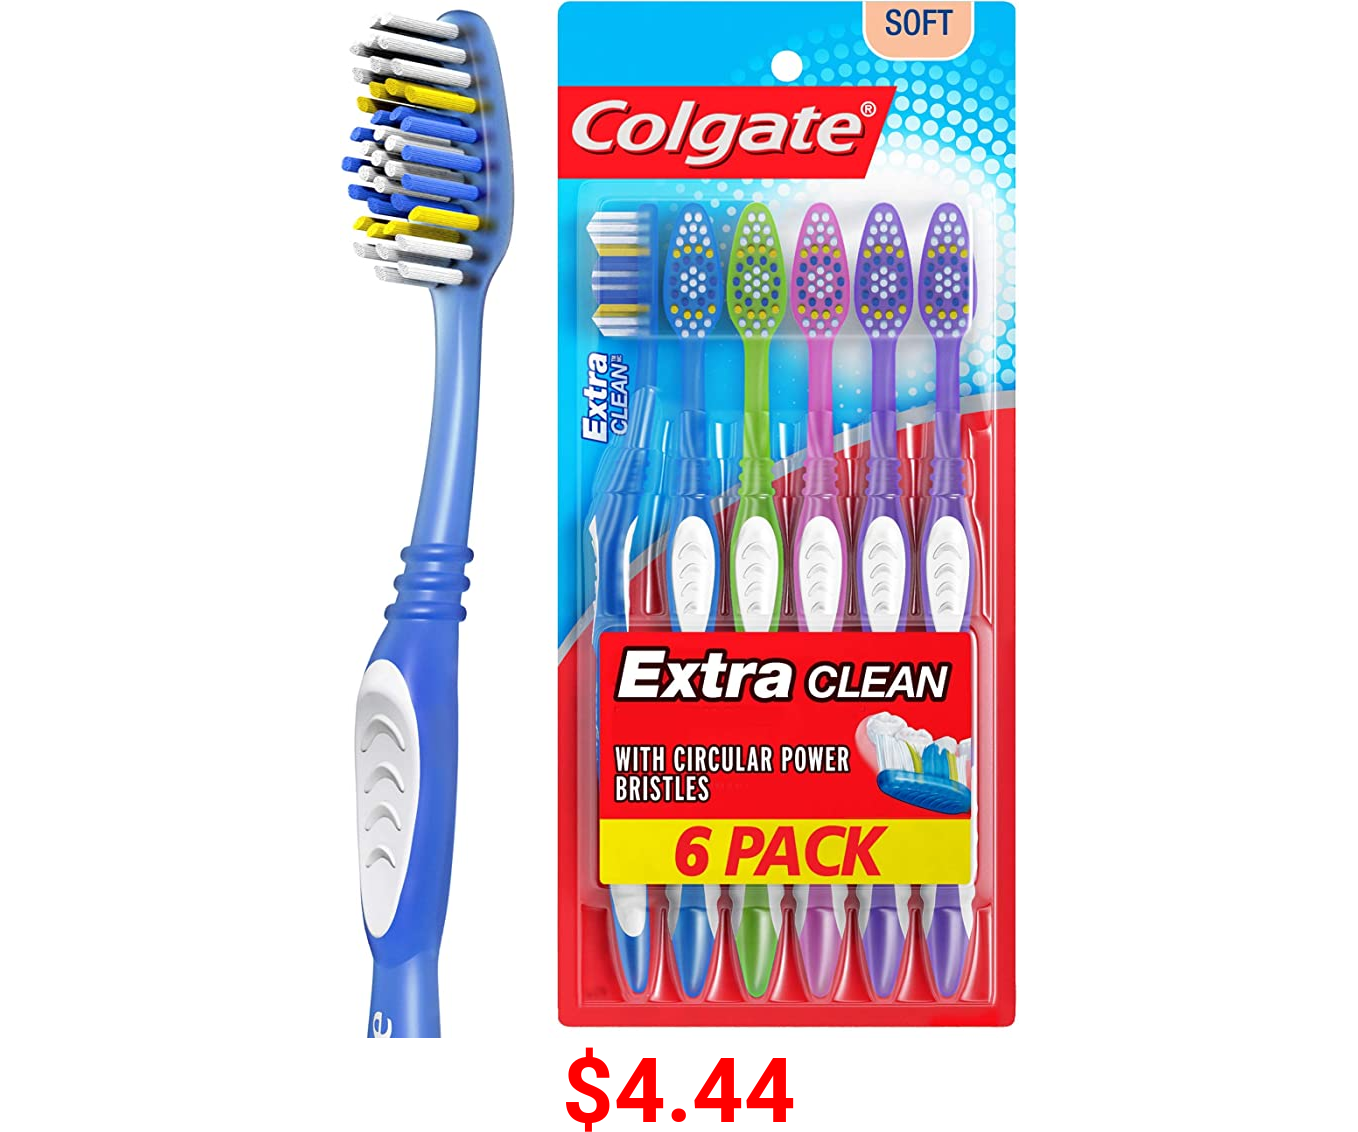 Colgate Extra Clean Toothbrush, Full Head, SoftÂ 6 Count (Pack of 1)